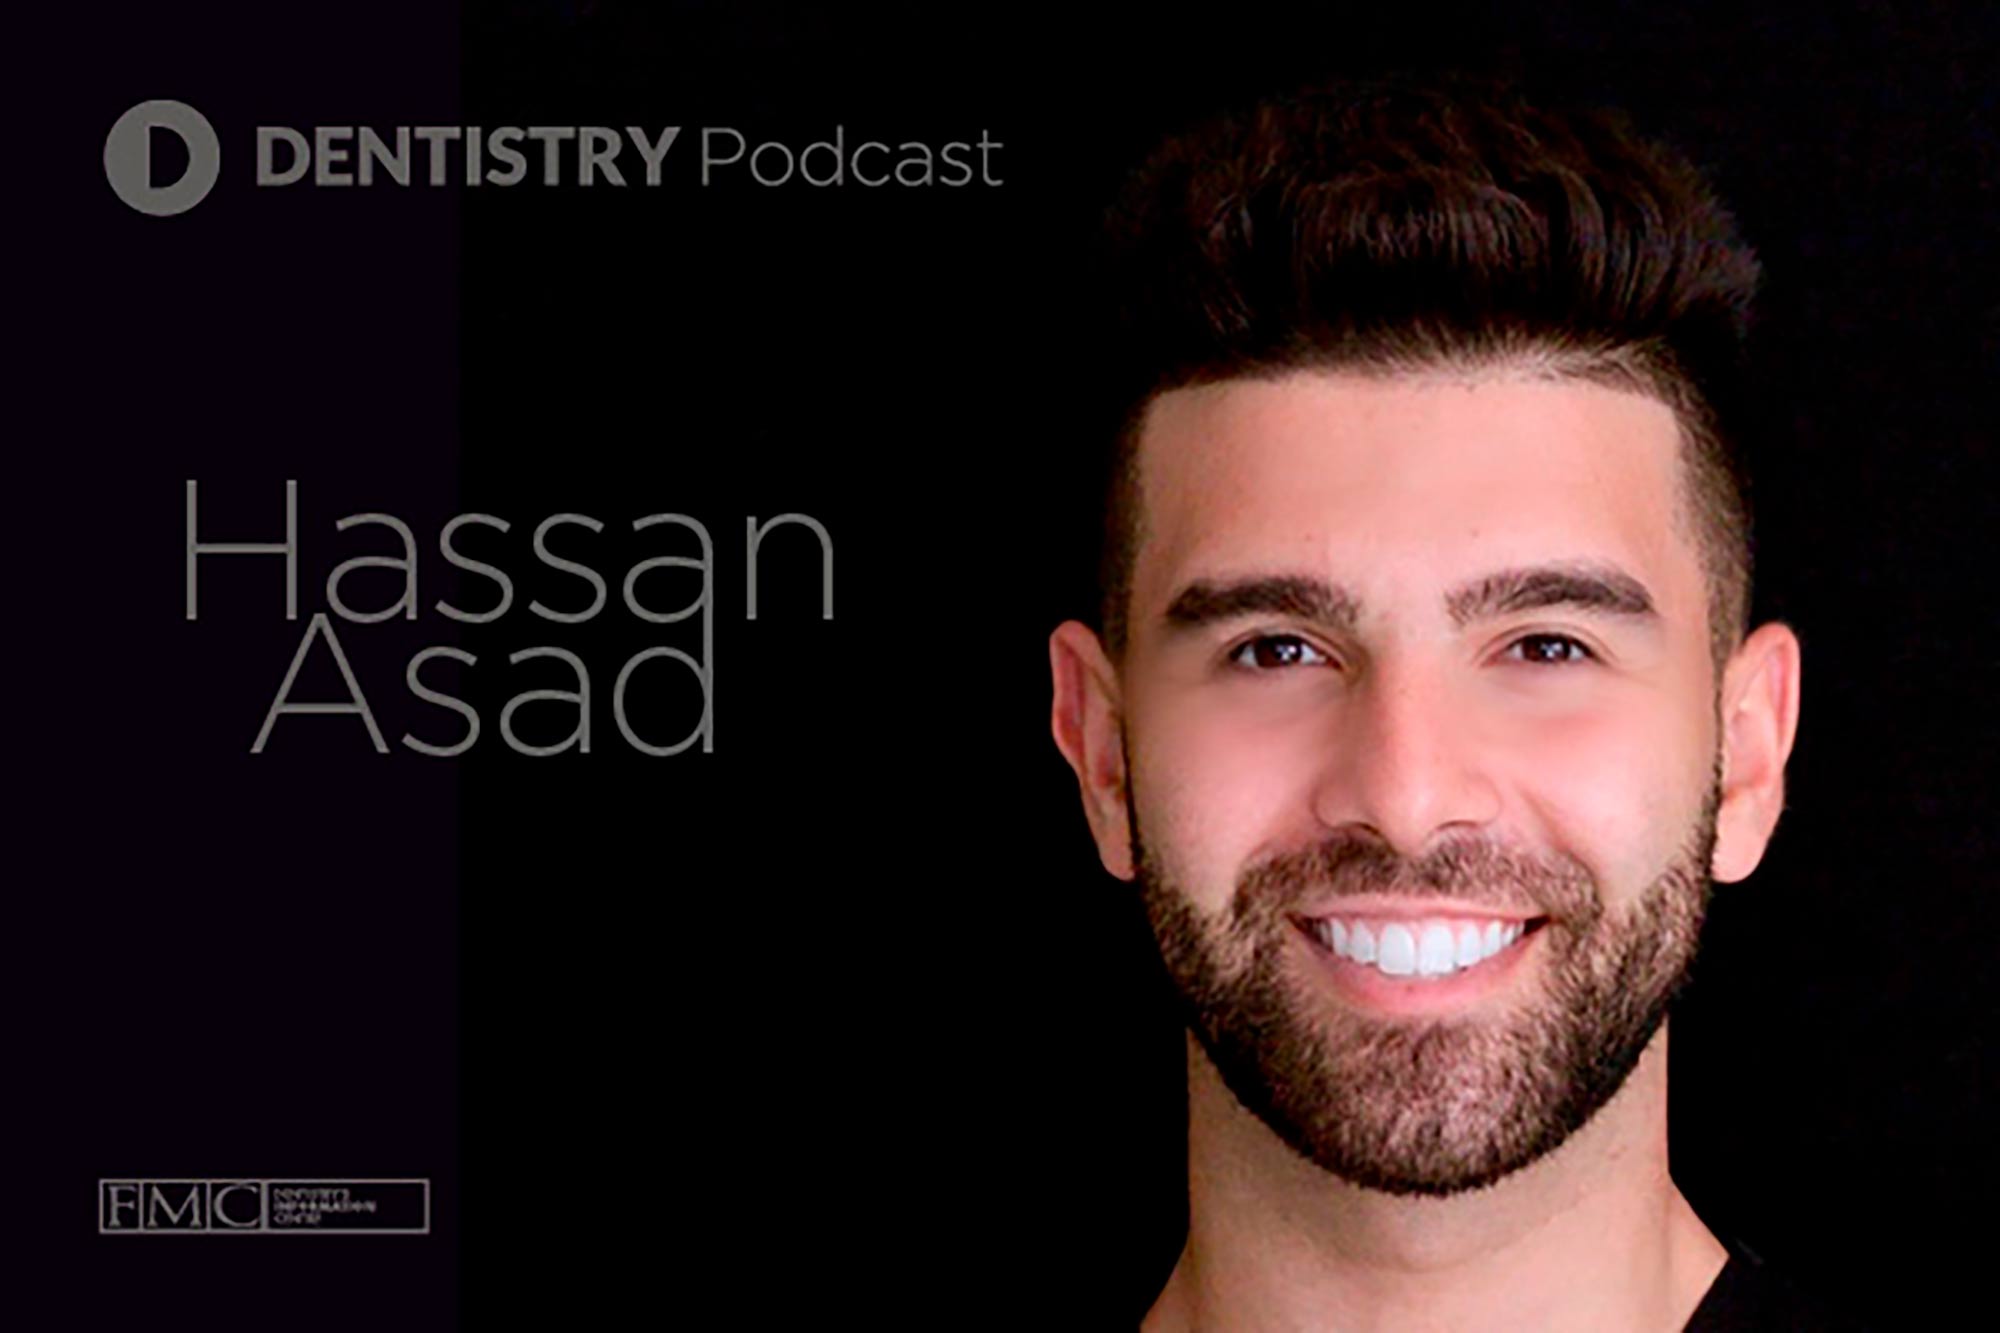 In the tenth episode, we chat to Hassan Asad – also known as the Bearded Tooth Fairy